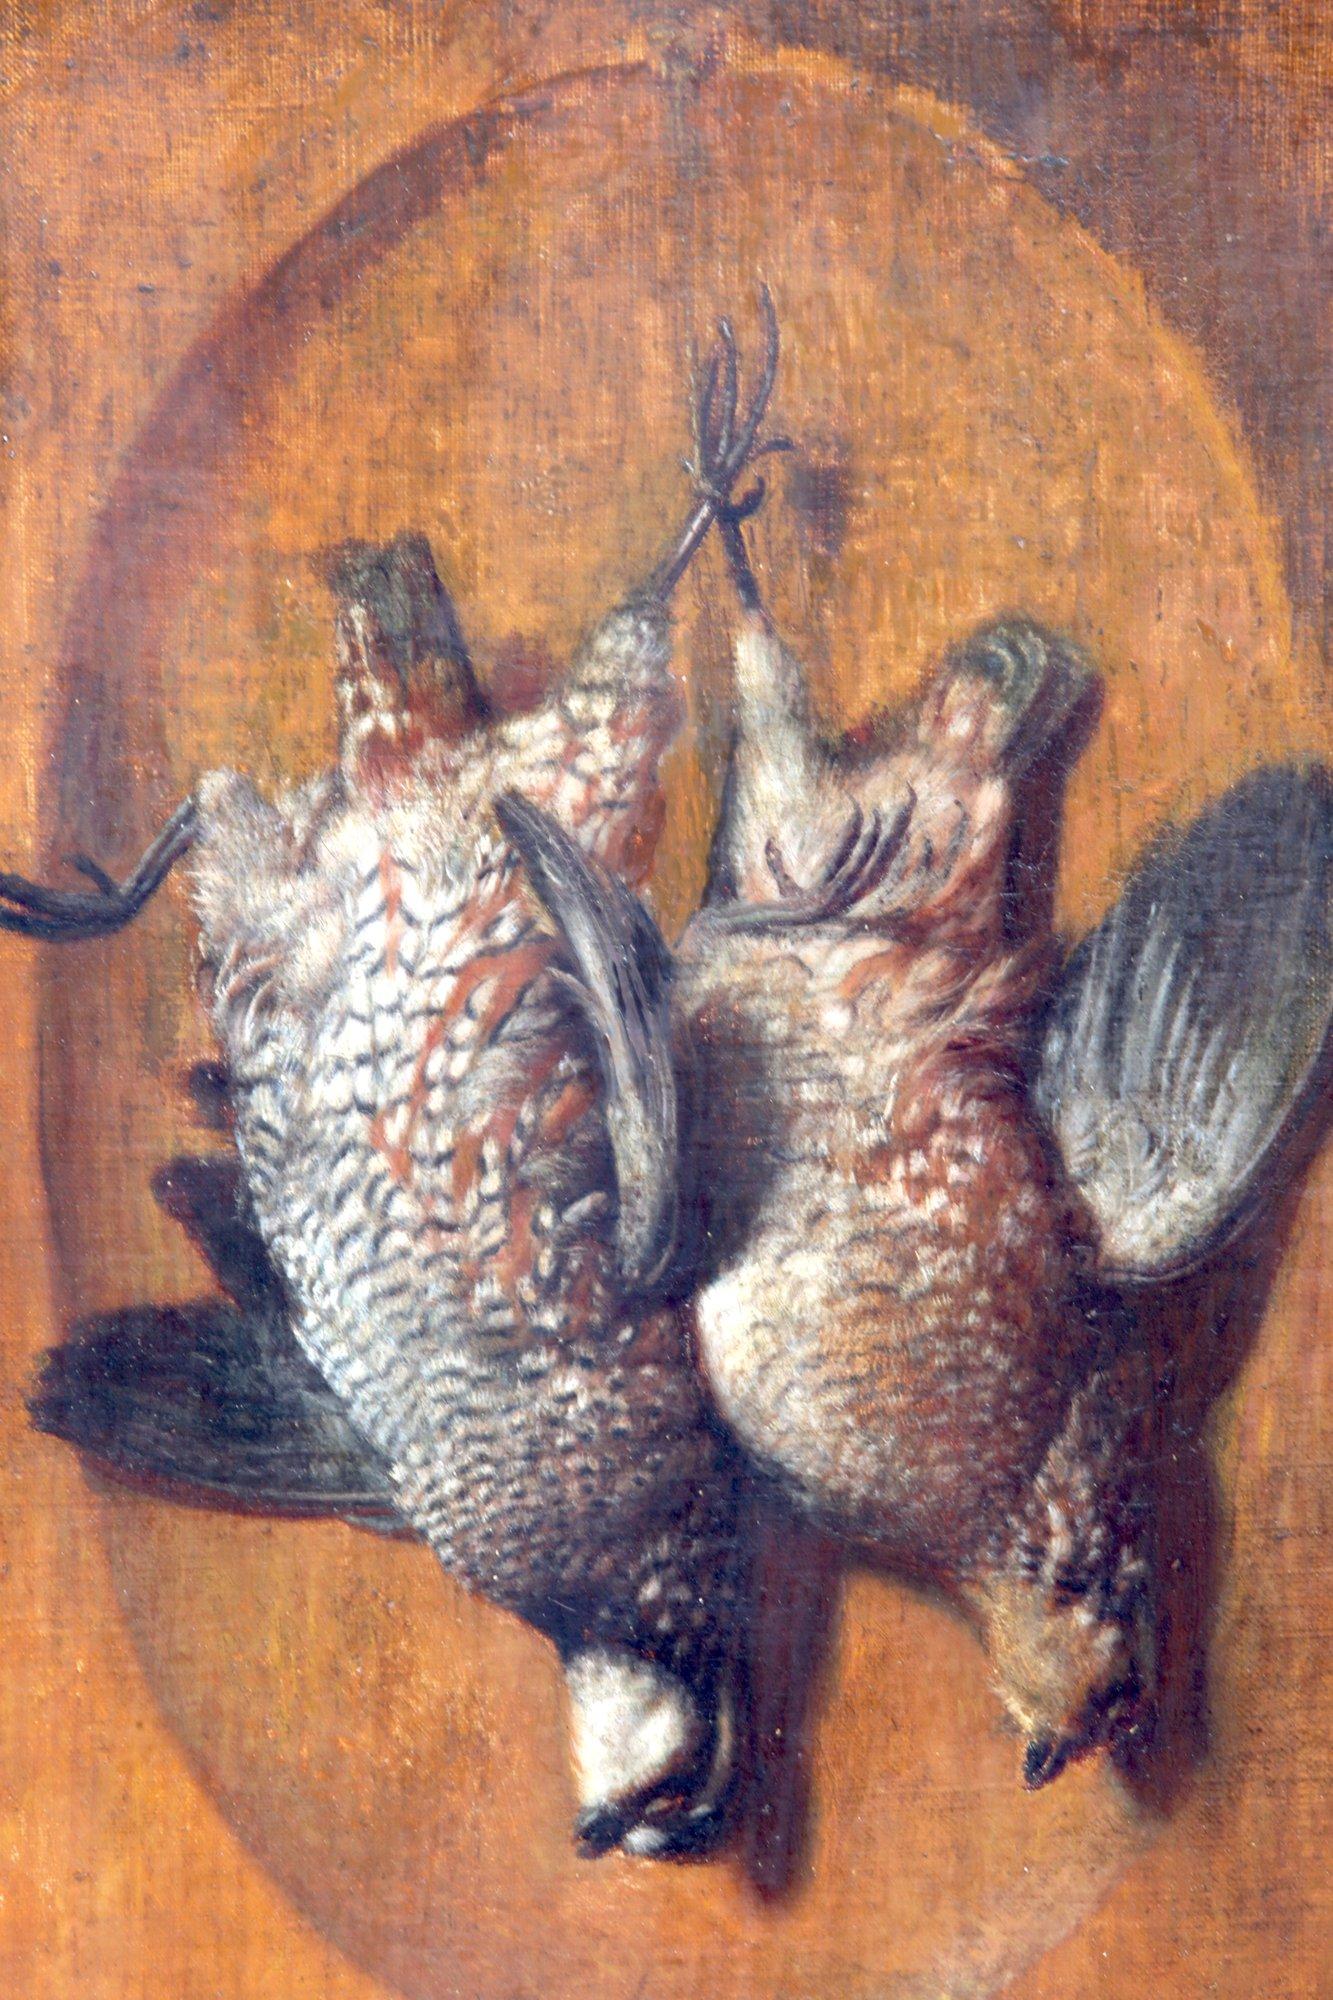 Two Grouse Framed Oil Painting